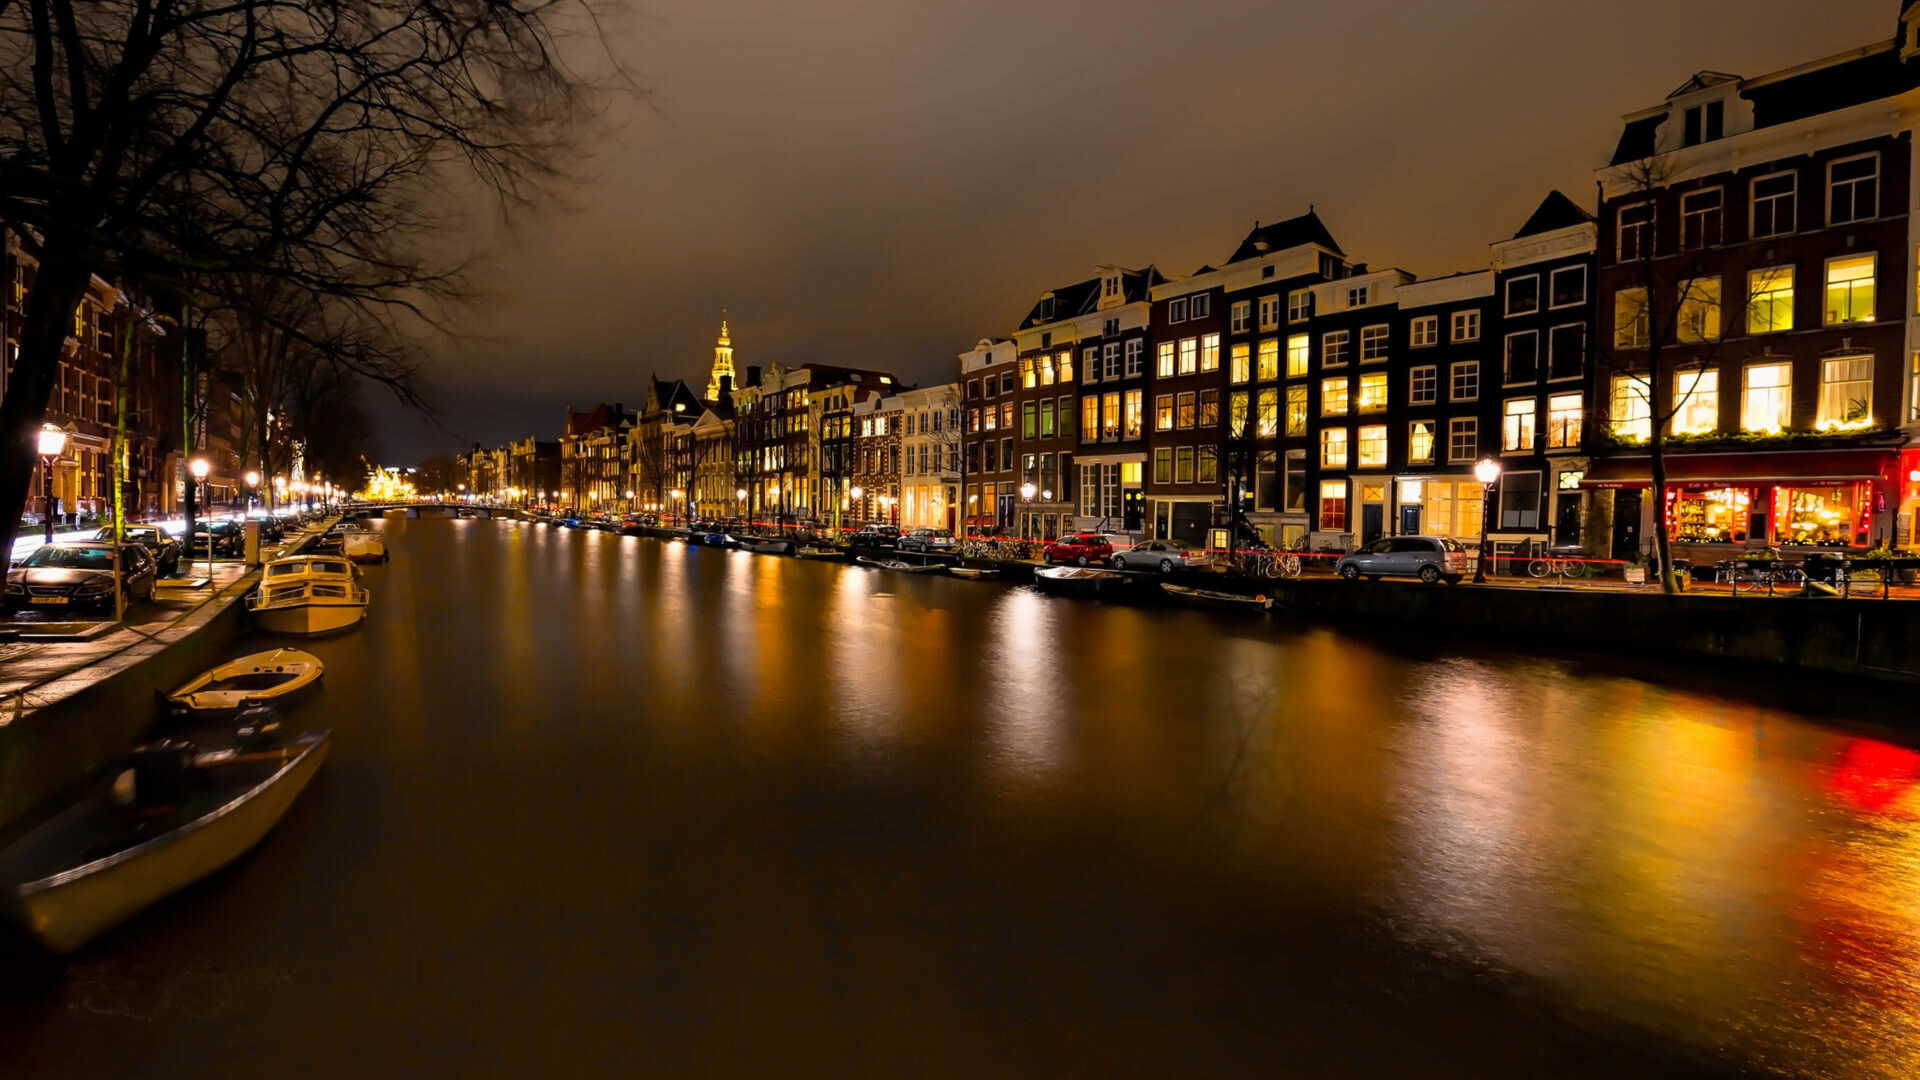 Amsterdam: Netherlands, River Amstel, The province of North Holland. 1920x1080 Full HD Wallpaper.